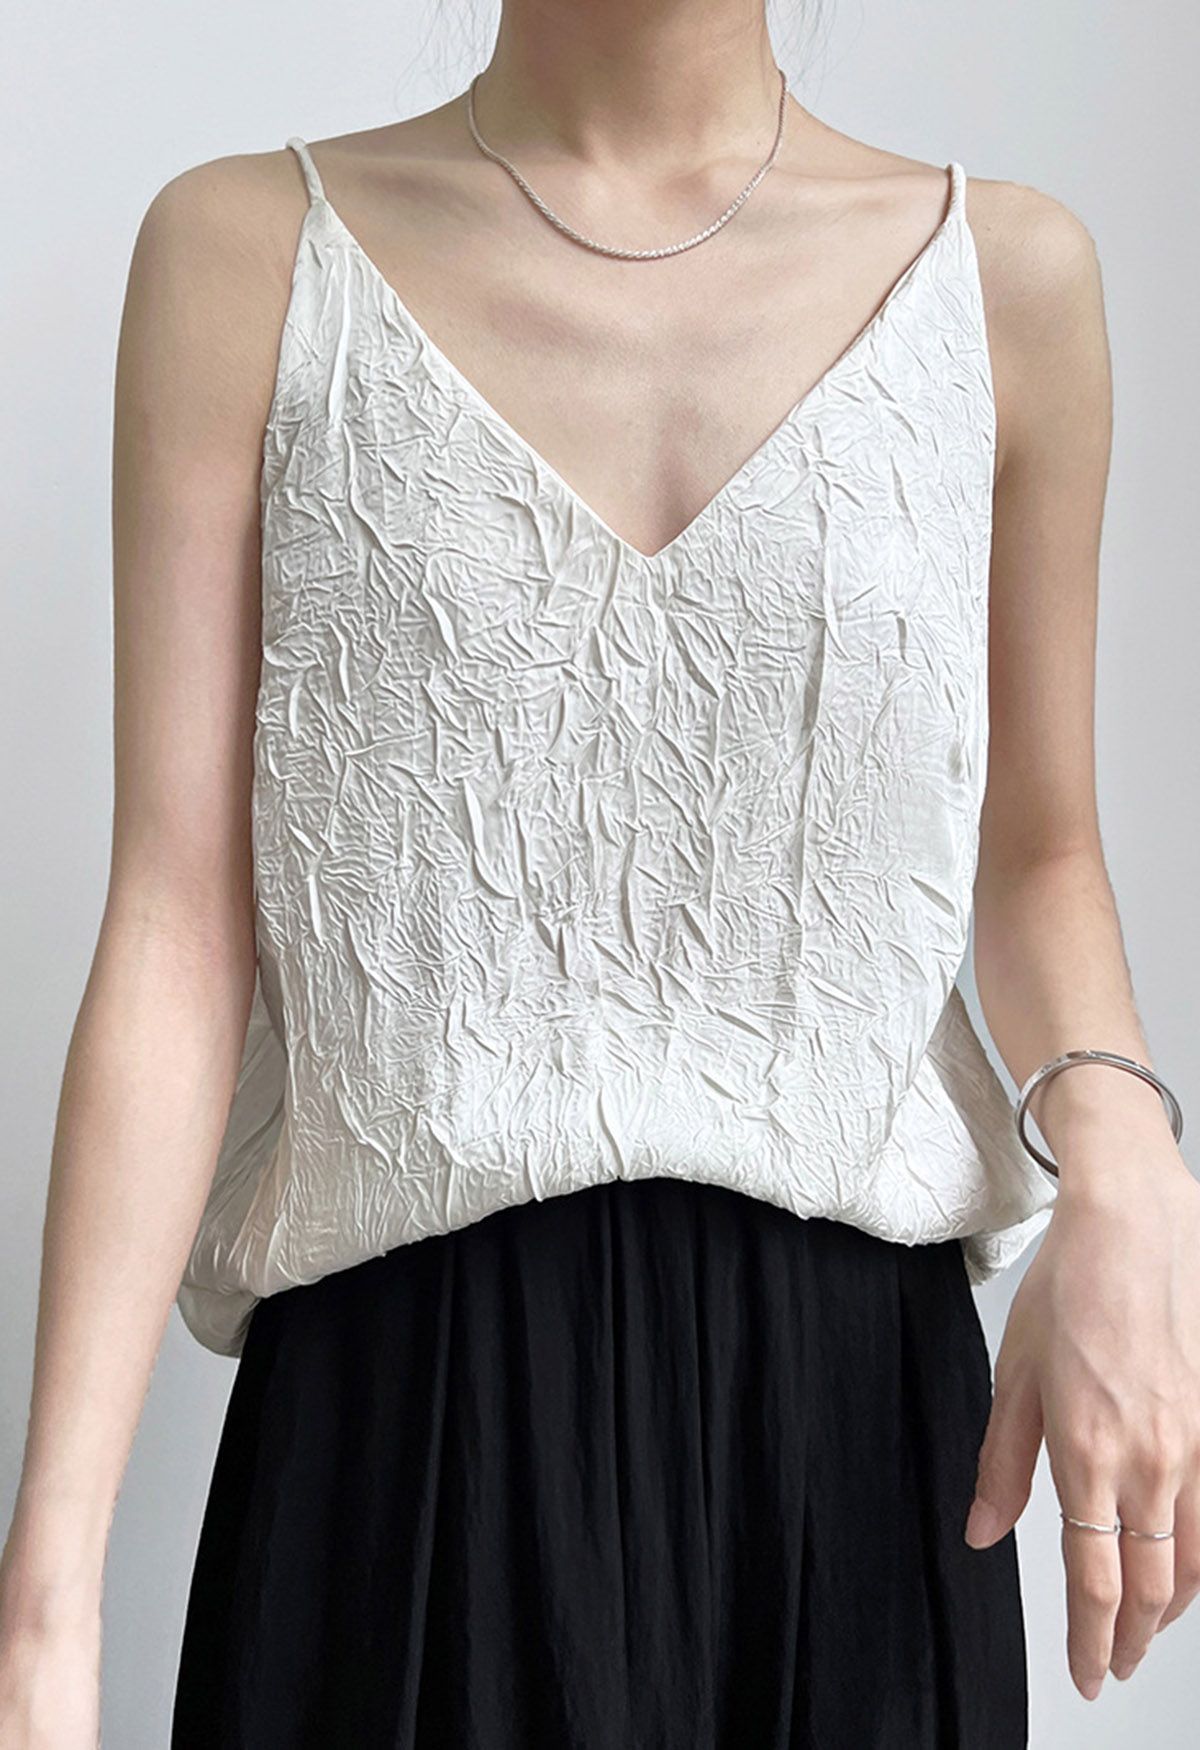 Embossed Texture V-Neck Cami Top in White